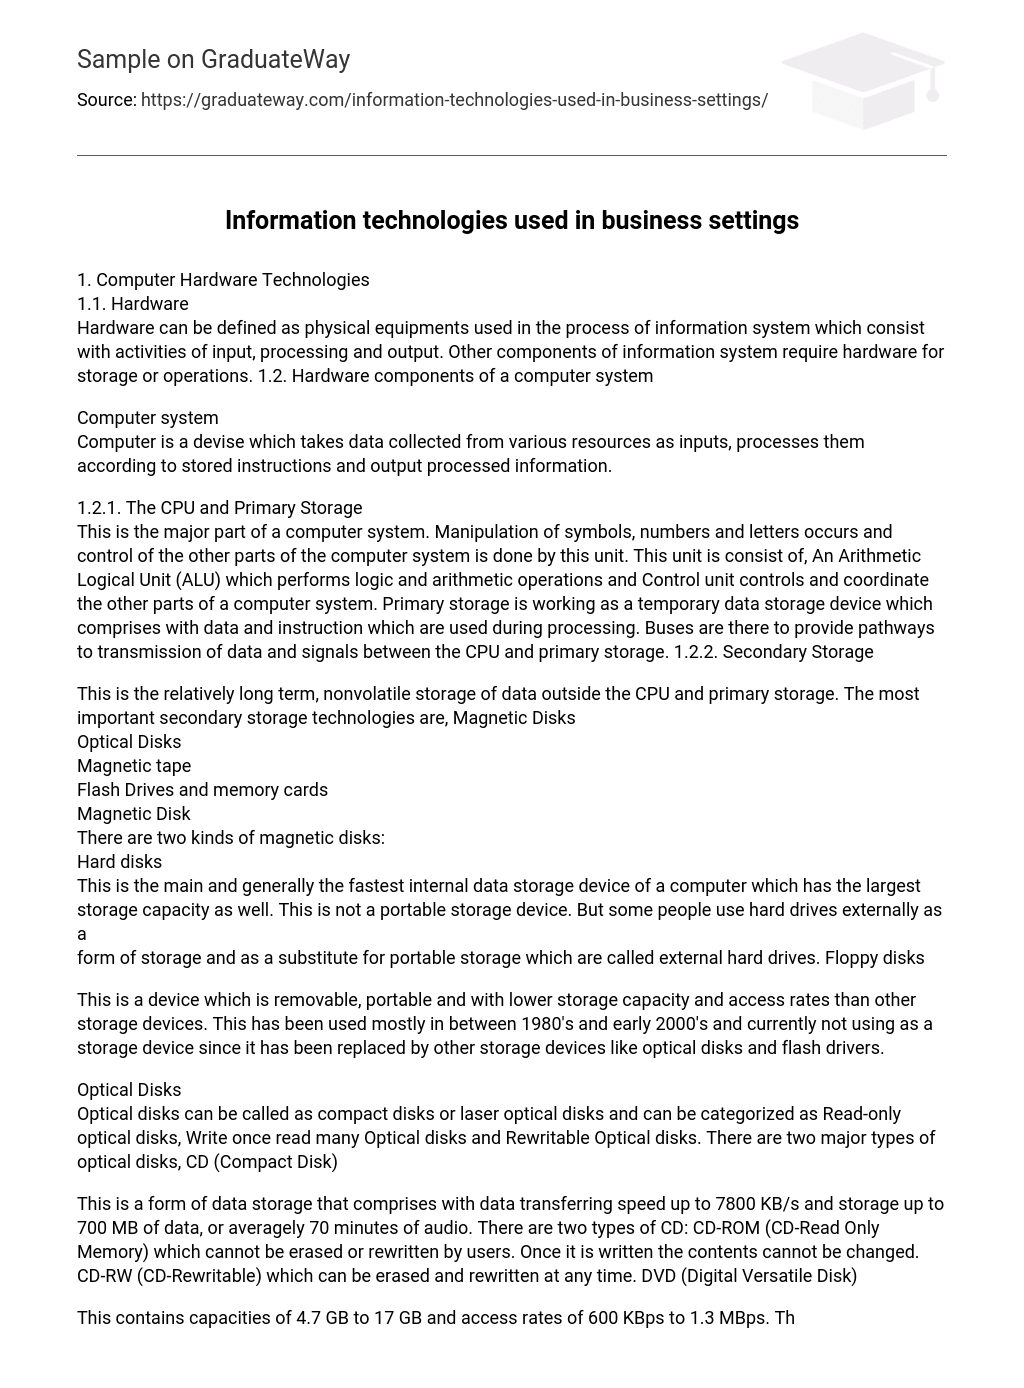 Information technologies used in business settings